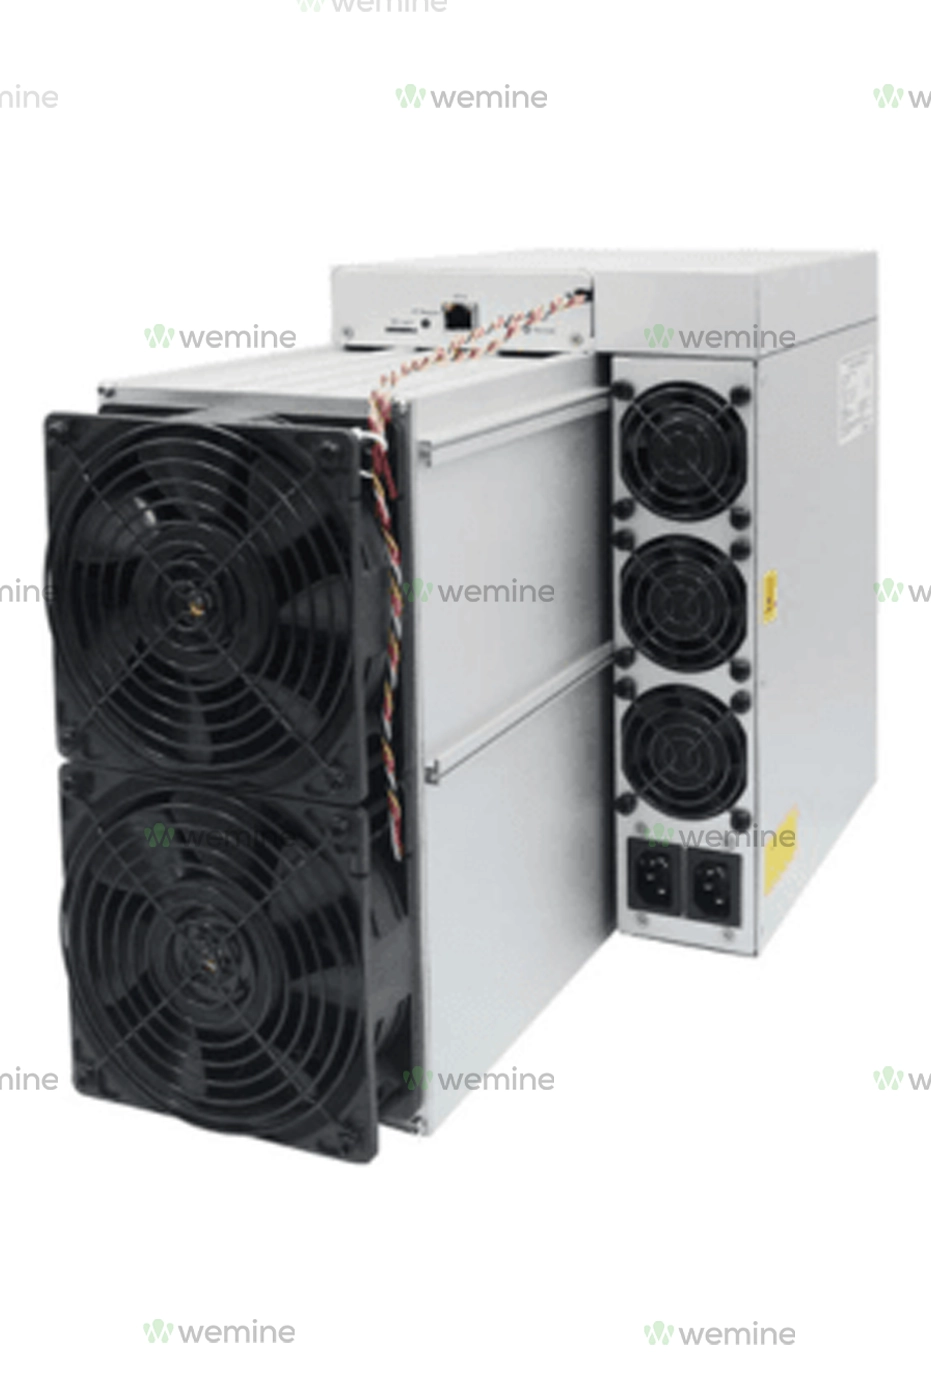 Bitmain Antminer E9 Pro 3.68Gh/s ETC Miner, a powerful cryptocurrency mining device with a silver casing and three prominent black cooling fans on one side, indicating its high processing capability for mining Ethereum Classic (ETC) with a hash rate of 3.68 gigahashes per second.